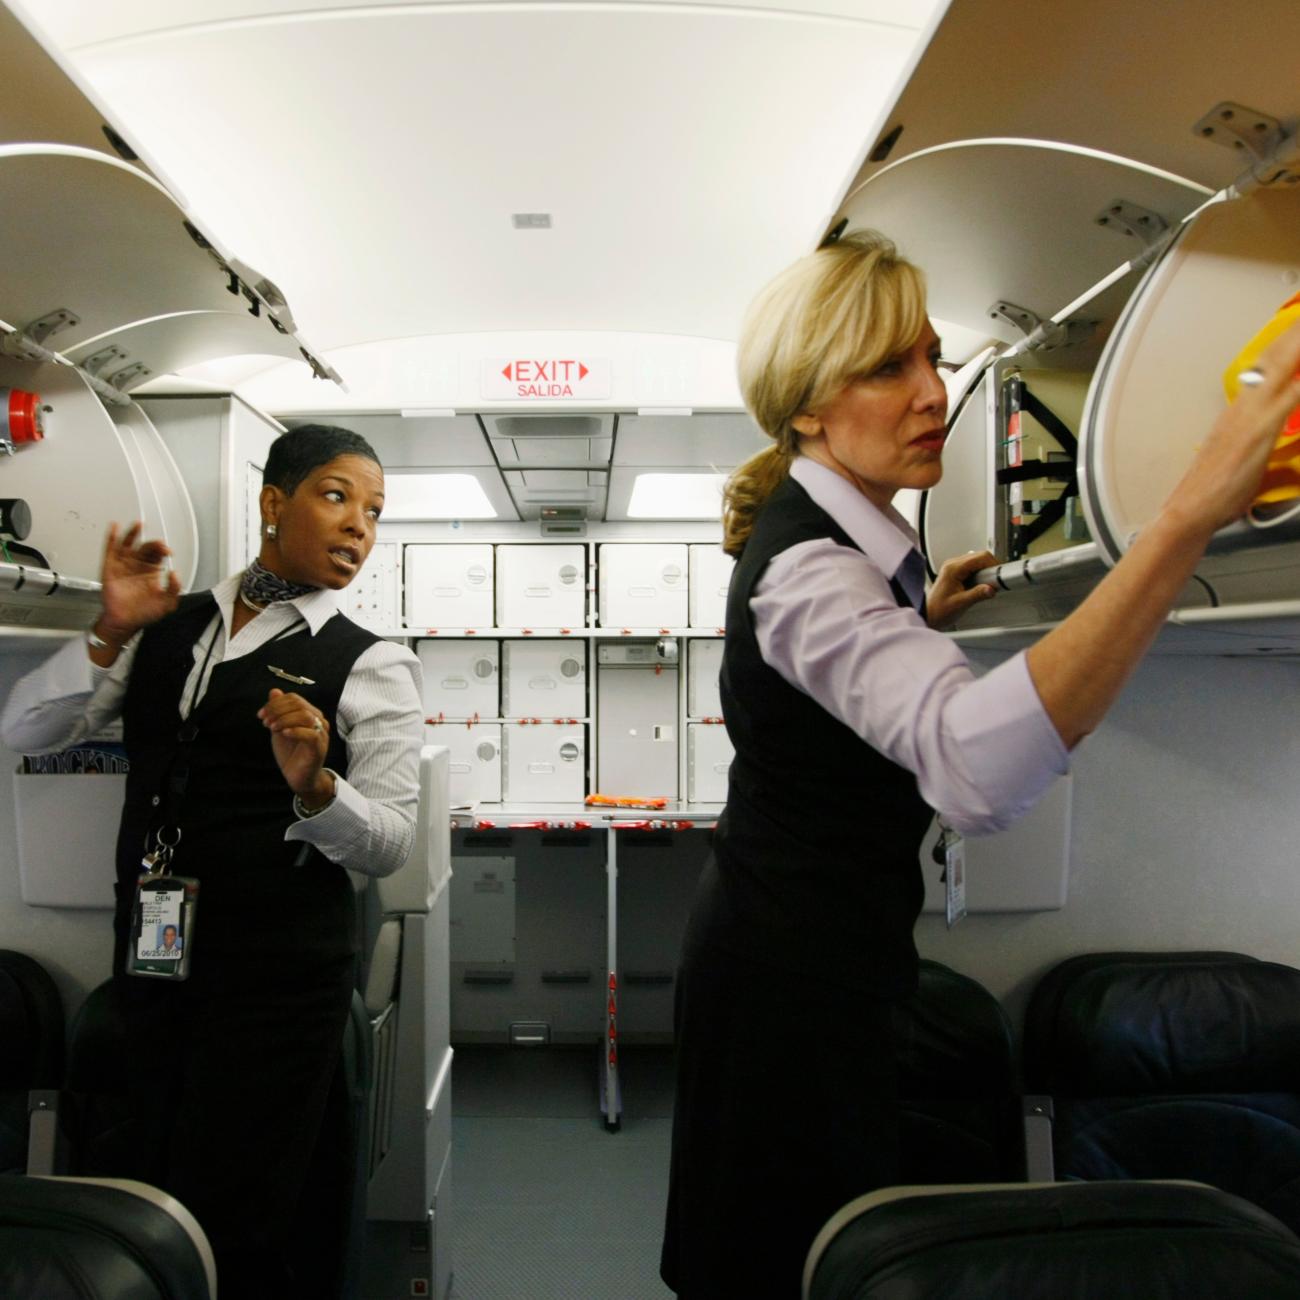 Frontier Airlines flight attendants check safety equipment